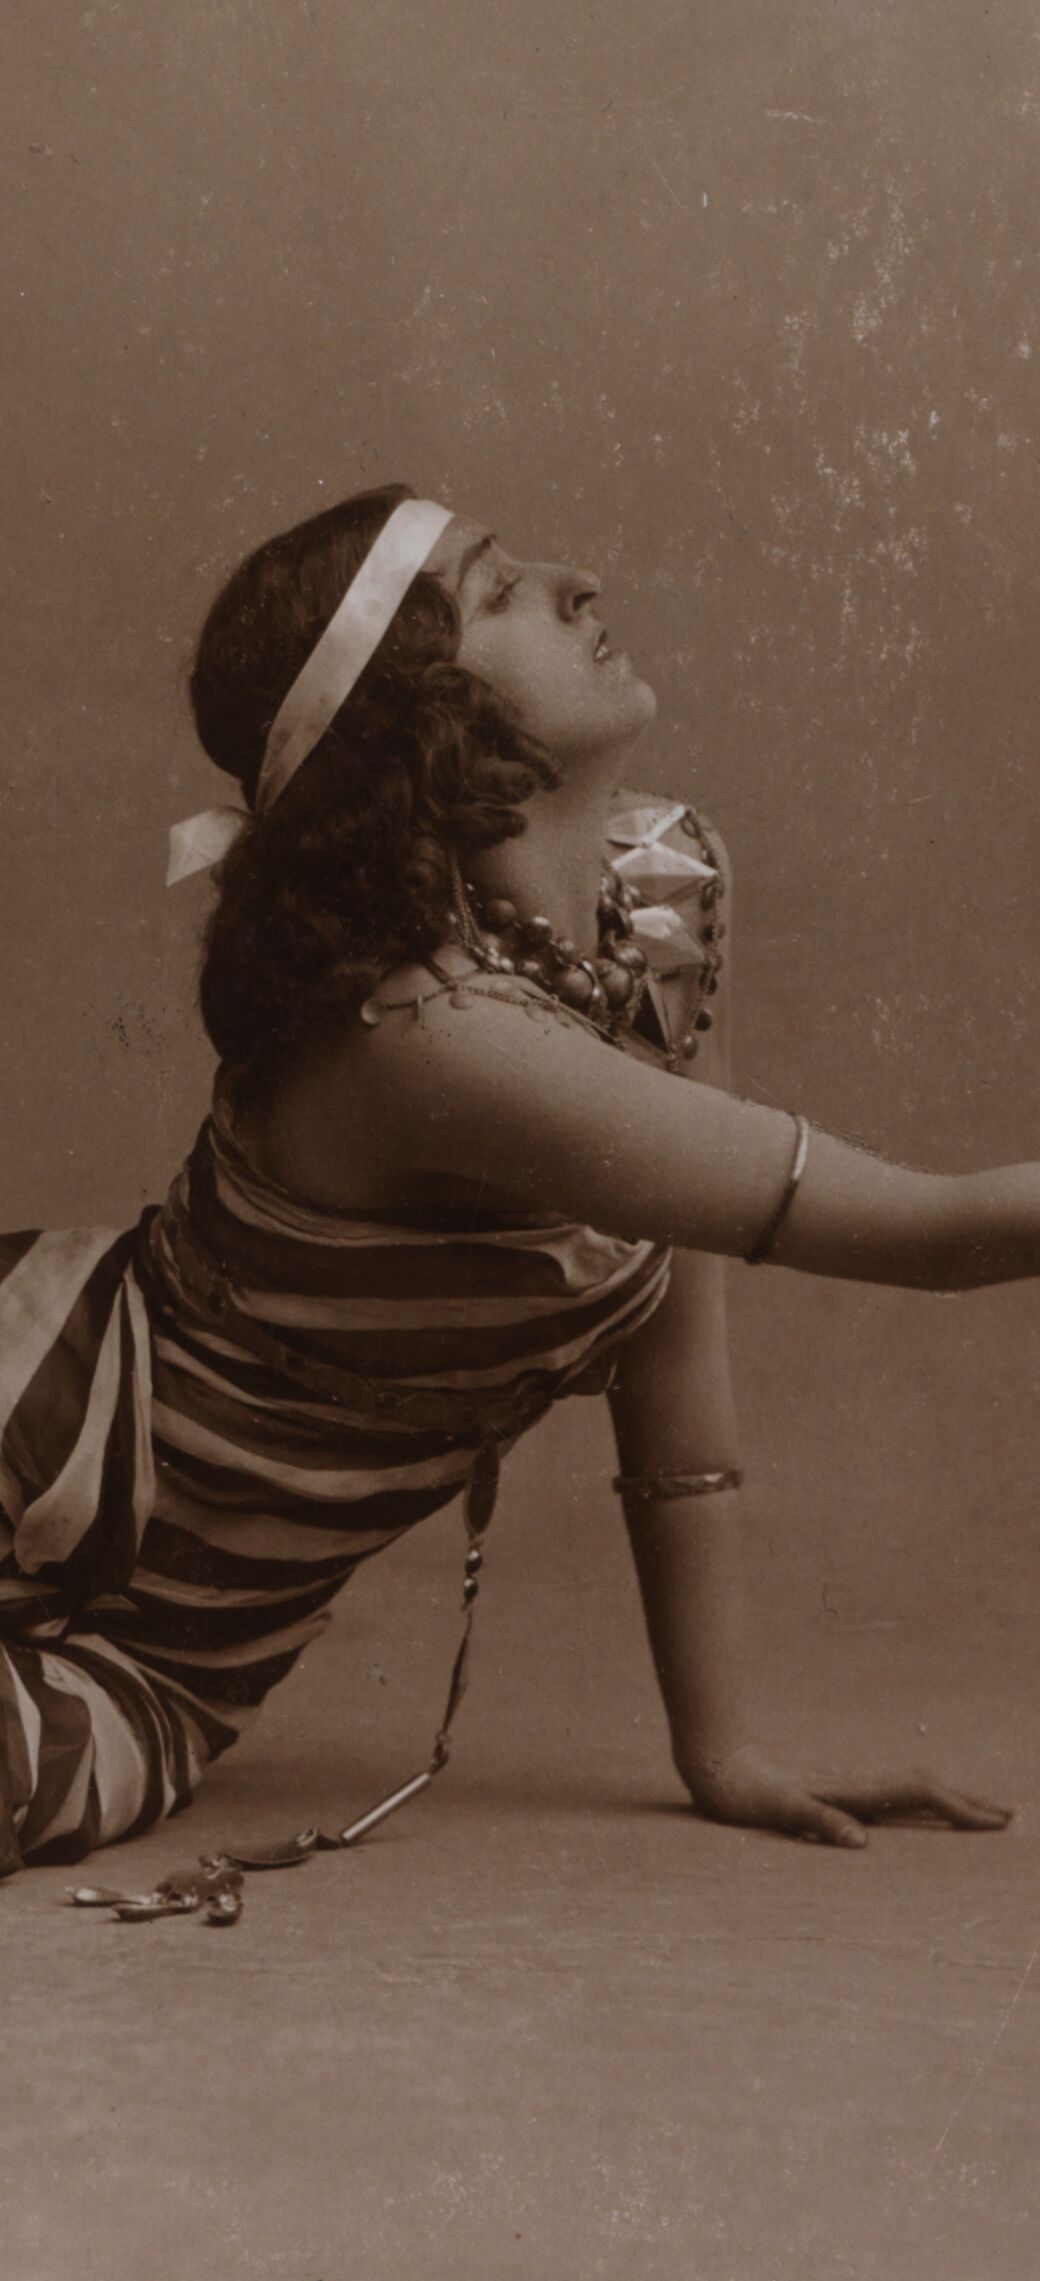 Atelier Jaeger (Stockholm) :: Dancer Vera Petrovna Fokina (1886-1958) in Cléopâtre, choreographic drama in one act. Choreography by Michel Fokine. Stockholm Royal Theatre, 1913 [detail, v] | src BnF · Gallica